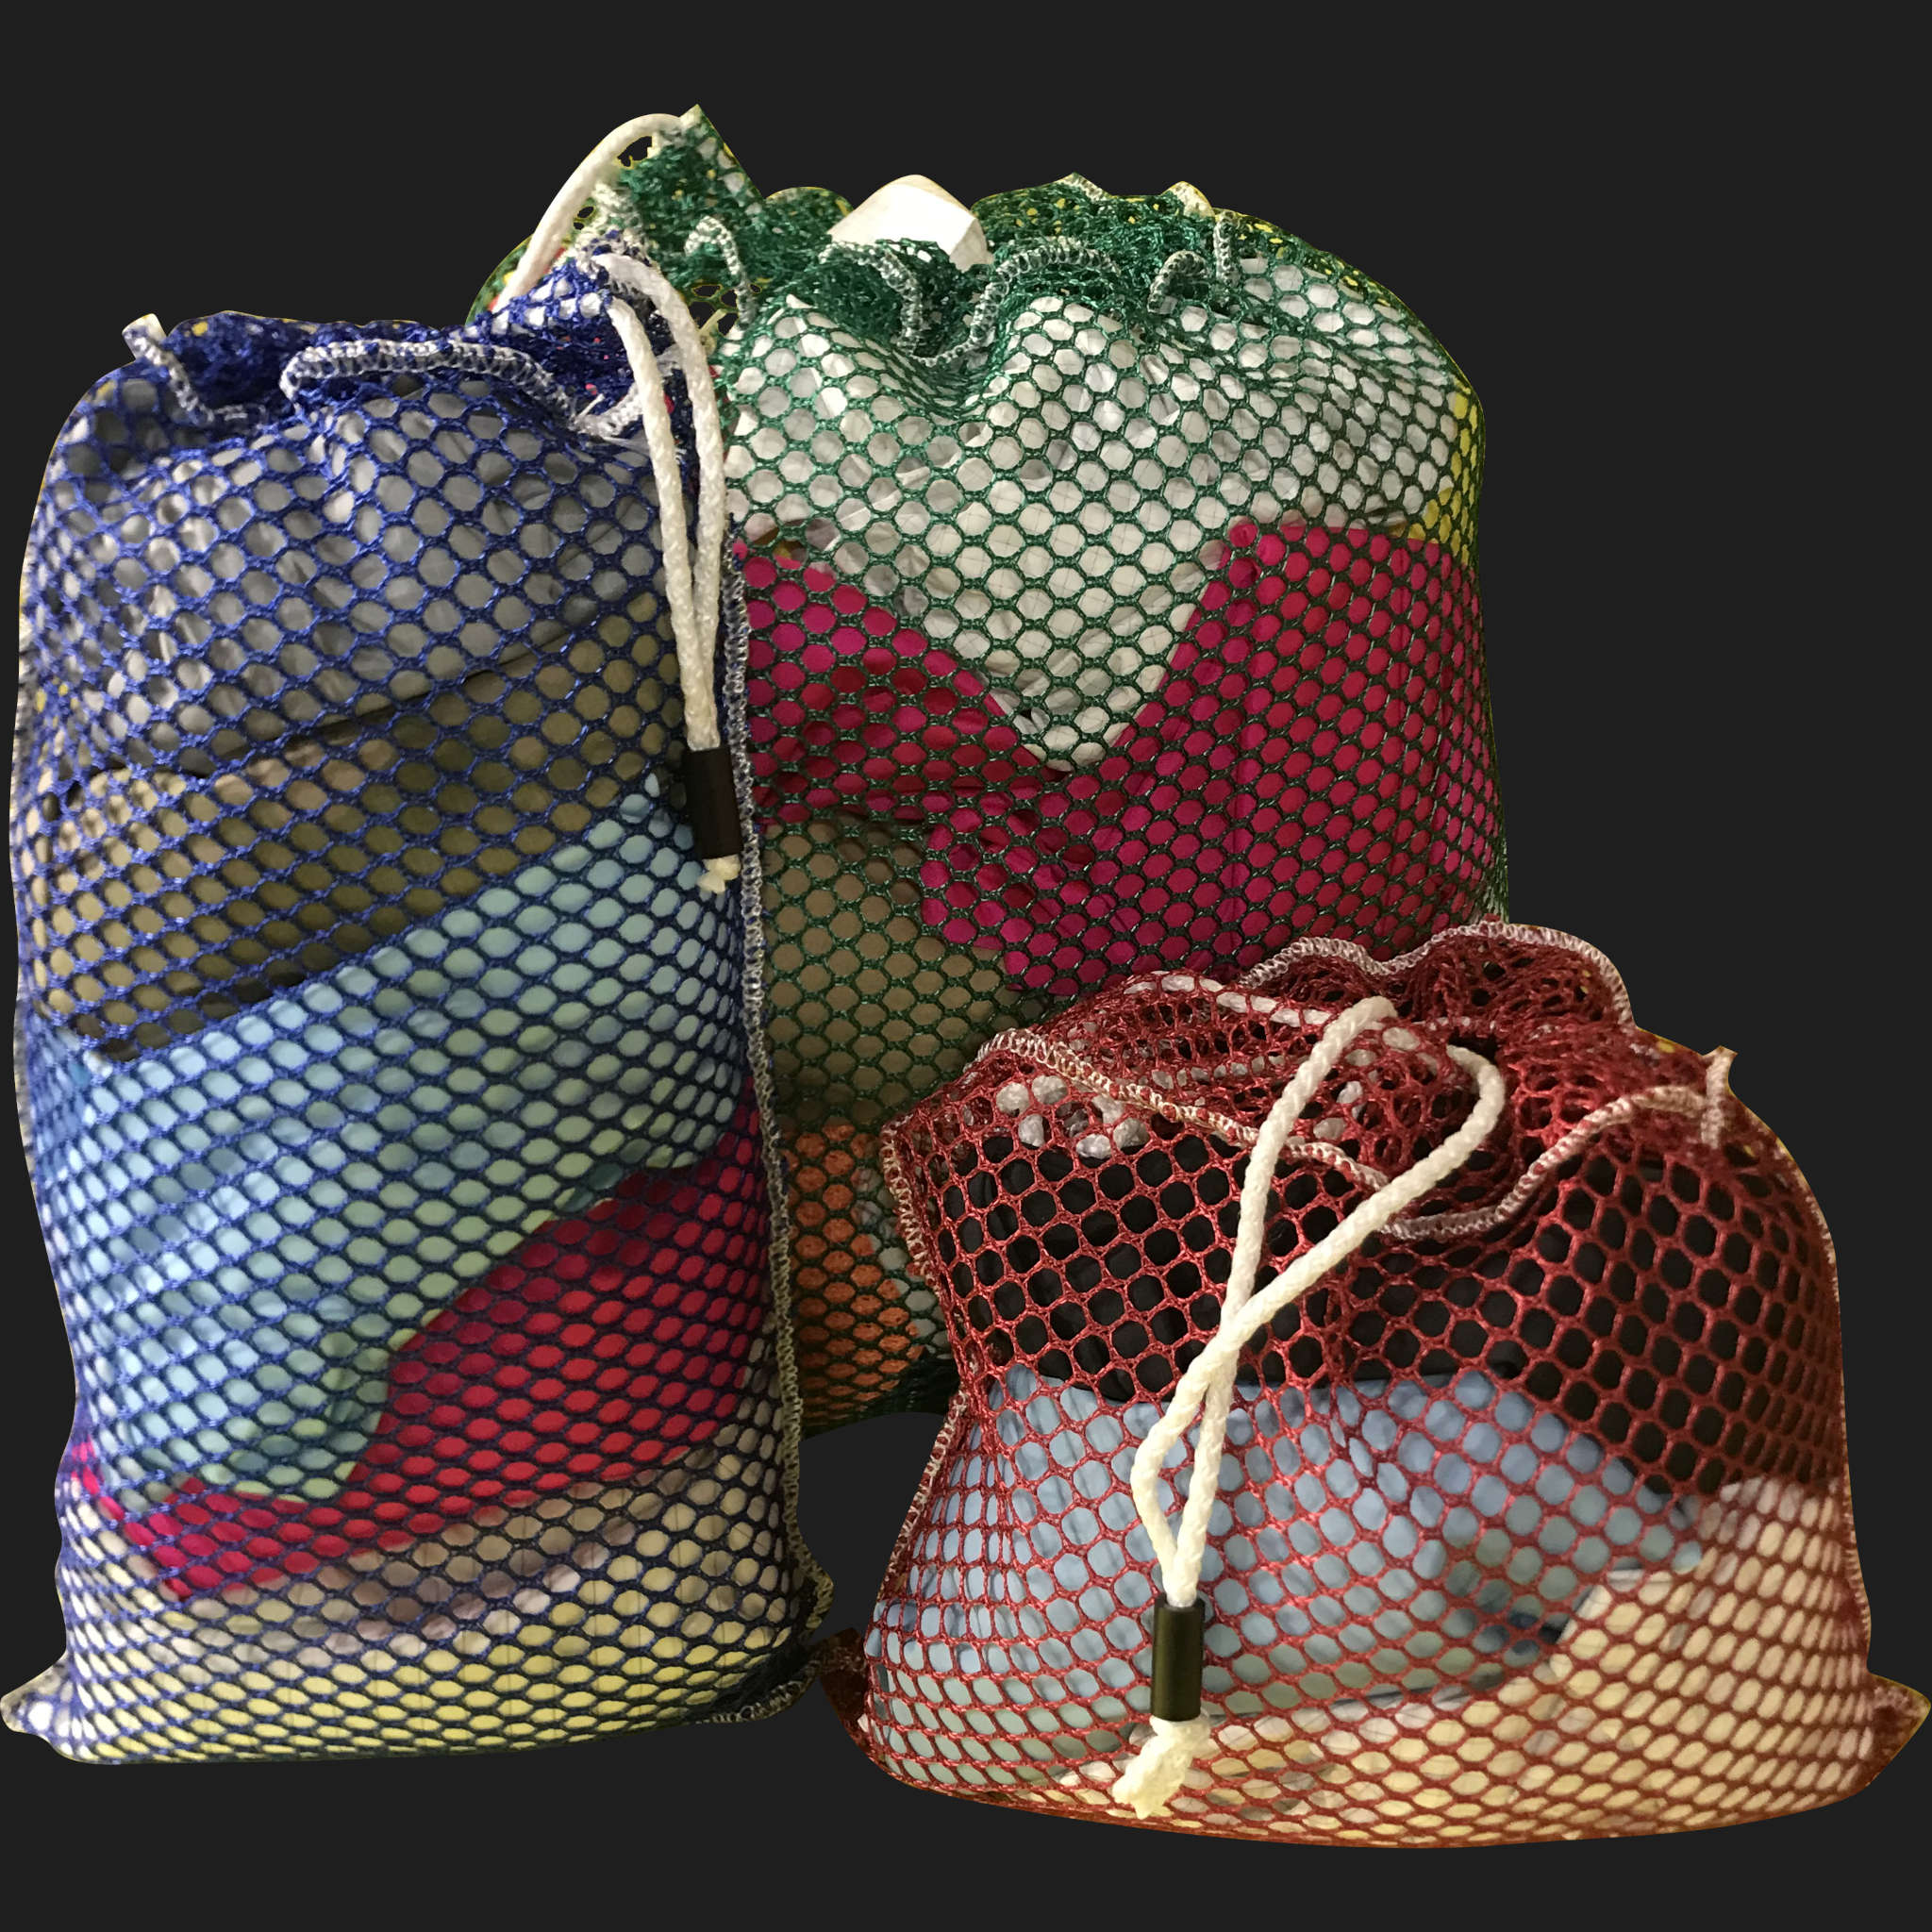 54" x 64" Customized Mesh-Net-Laundry Bags Heavy Duty with Cord and barrellock closure